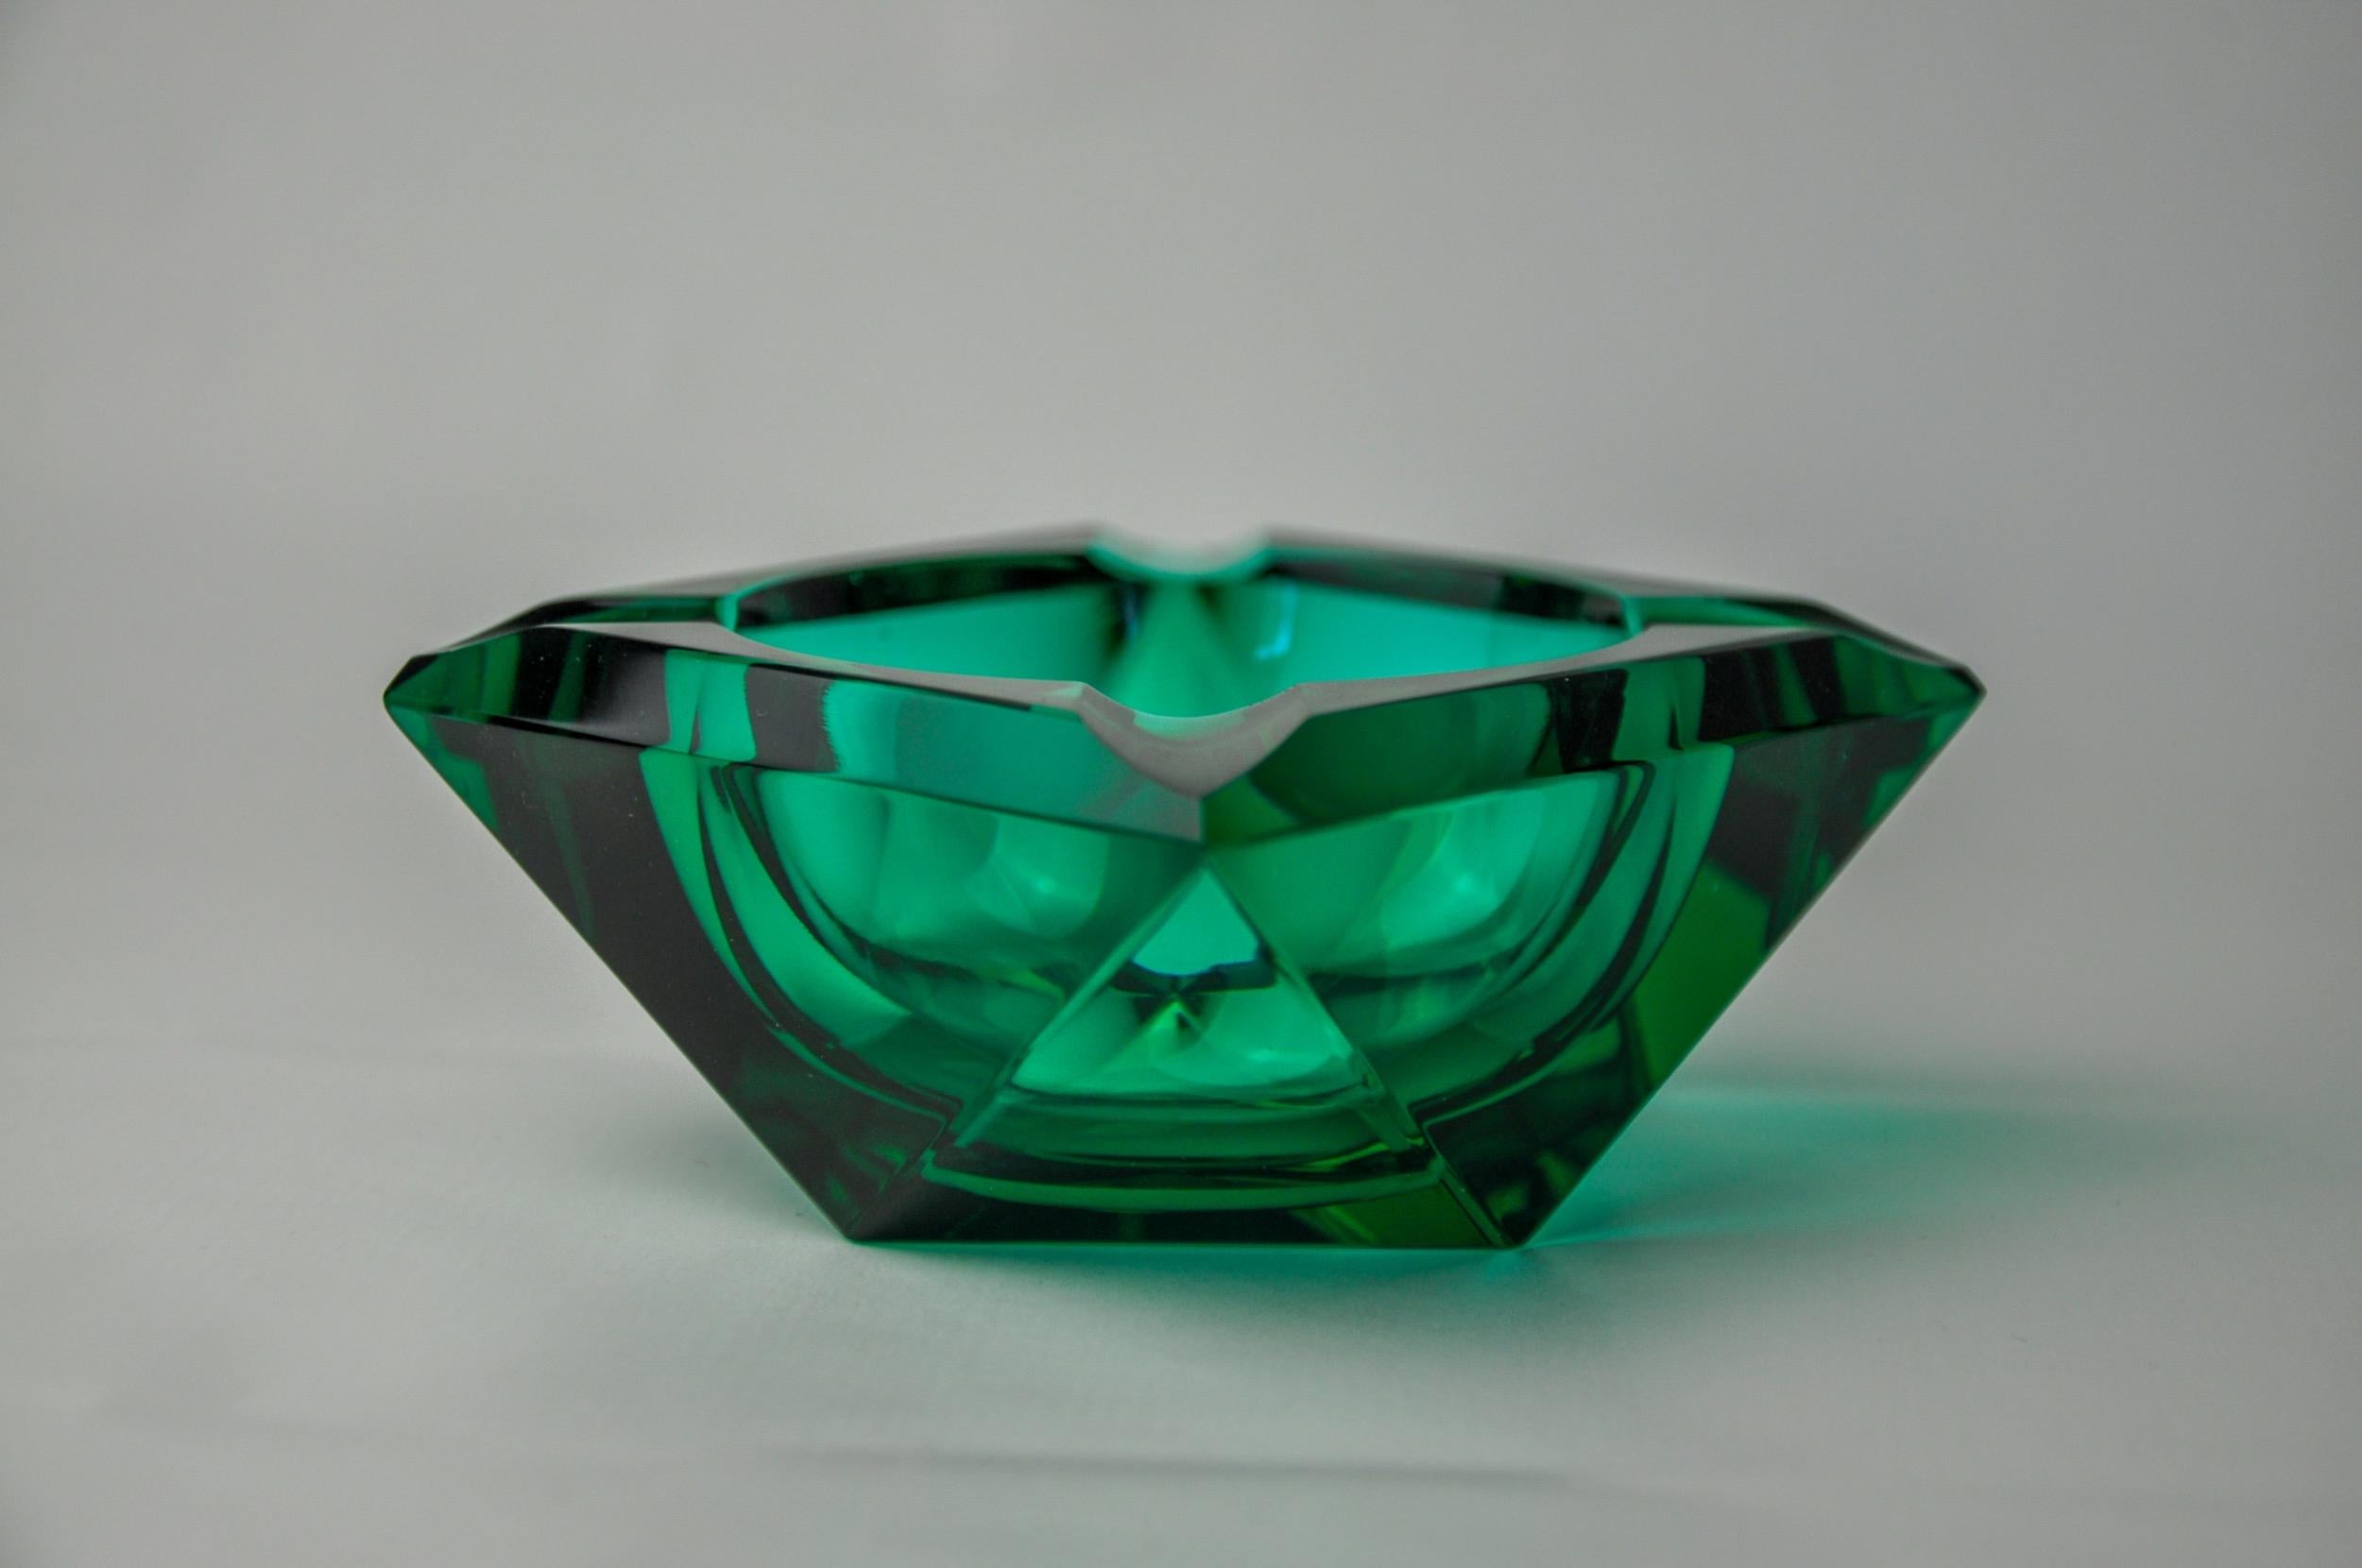 Rare green faceted ashtray designated and made for murano seguso in the 1970s. Superb craftsmanship of glass by venetian master glassmakers. Magnificent object of collection and decoration. Perfect state of conservation without lack or shine. Ref: